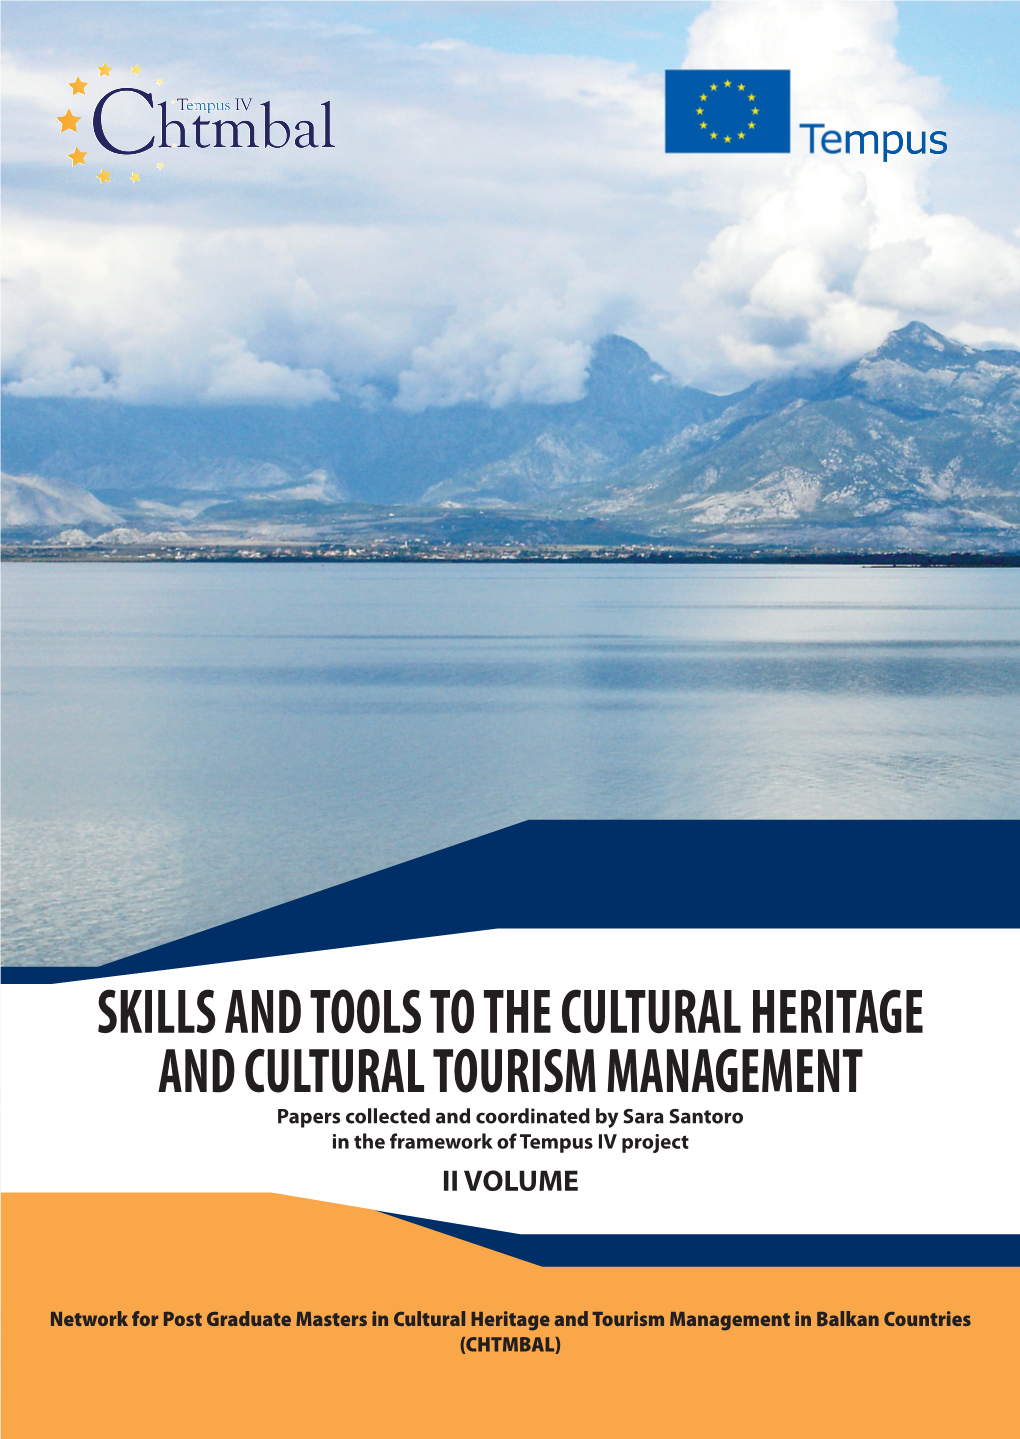 Skills and Tools to the Cultural Heritage and Cultural Tourism Management - Ii